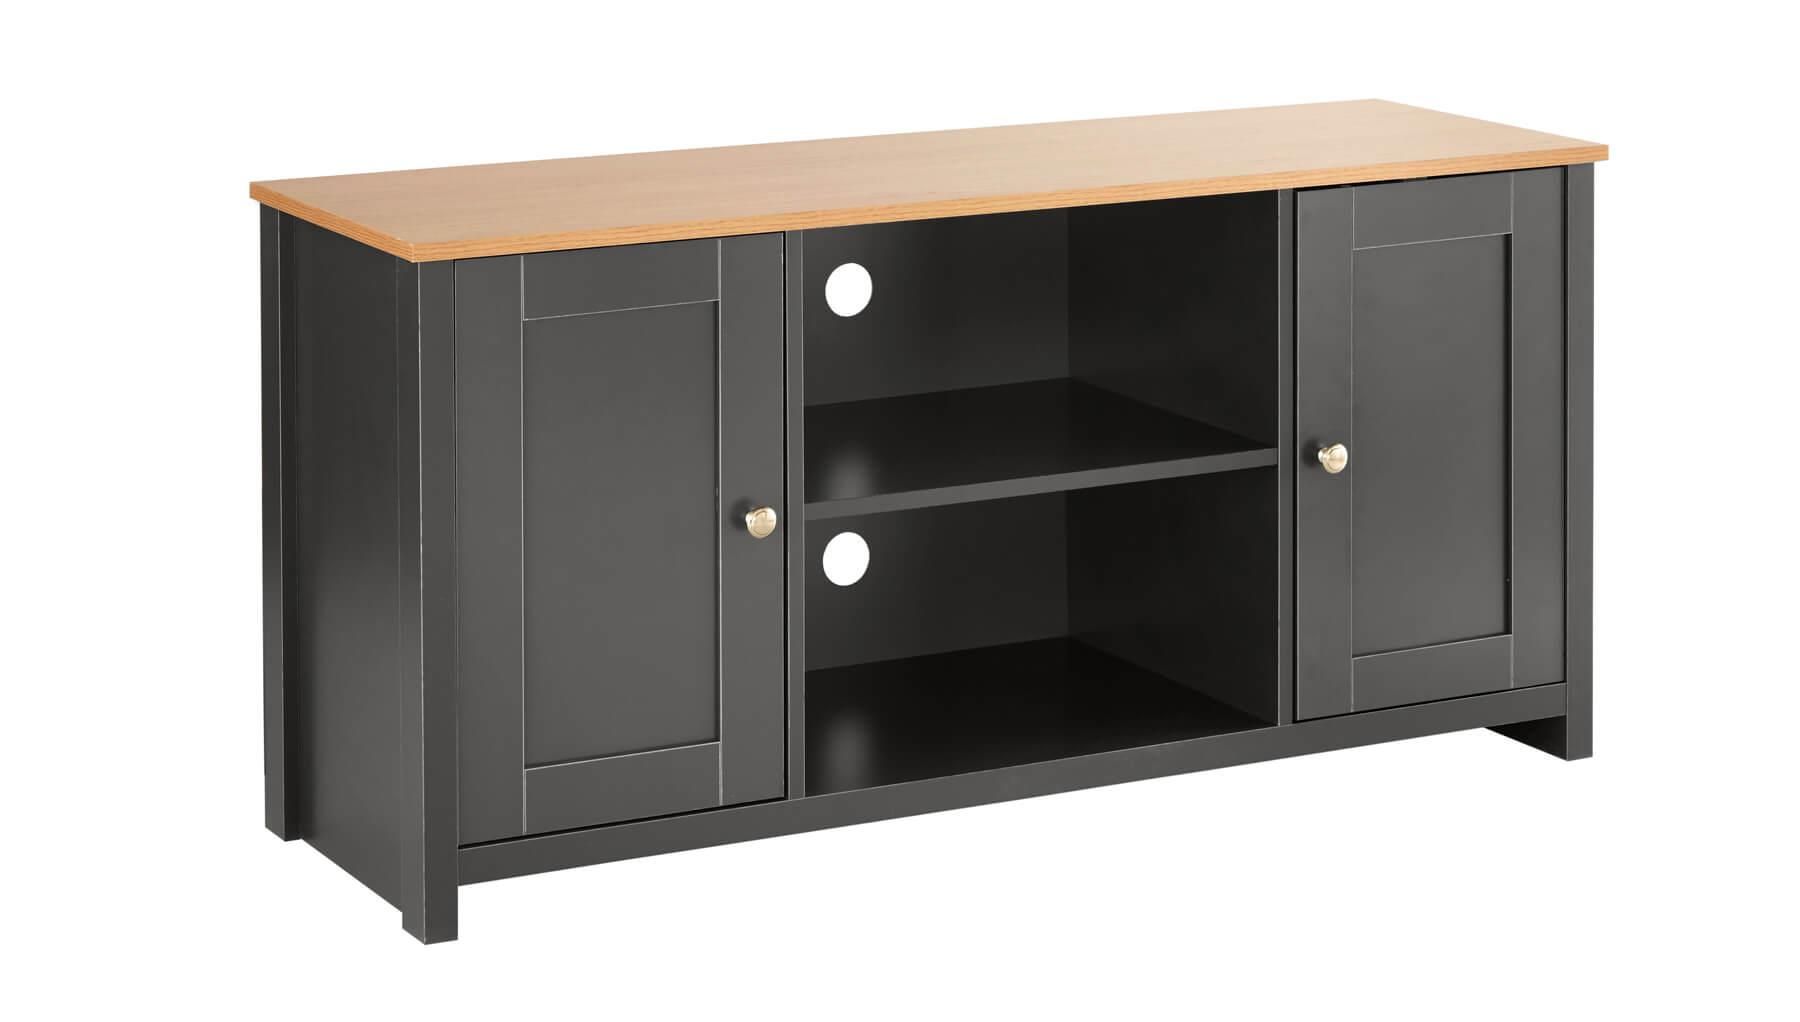 Graphite Oak Tv Stand Two Tone 2 Door Television Unit Open Shelf Cable Intended For Graphite 2 Drawer Compact Desks (View 4 of 15)